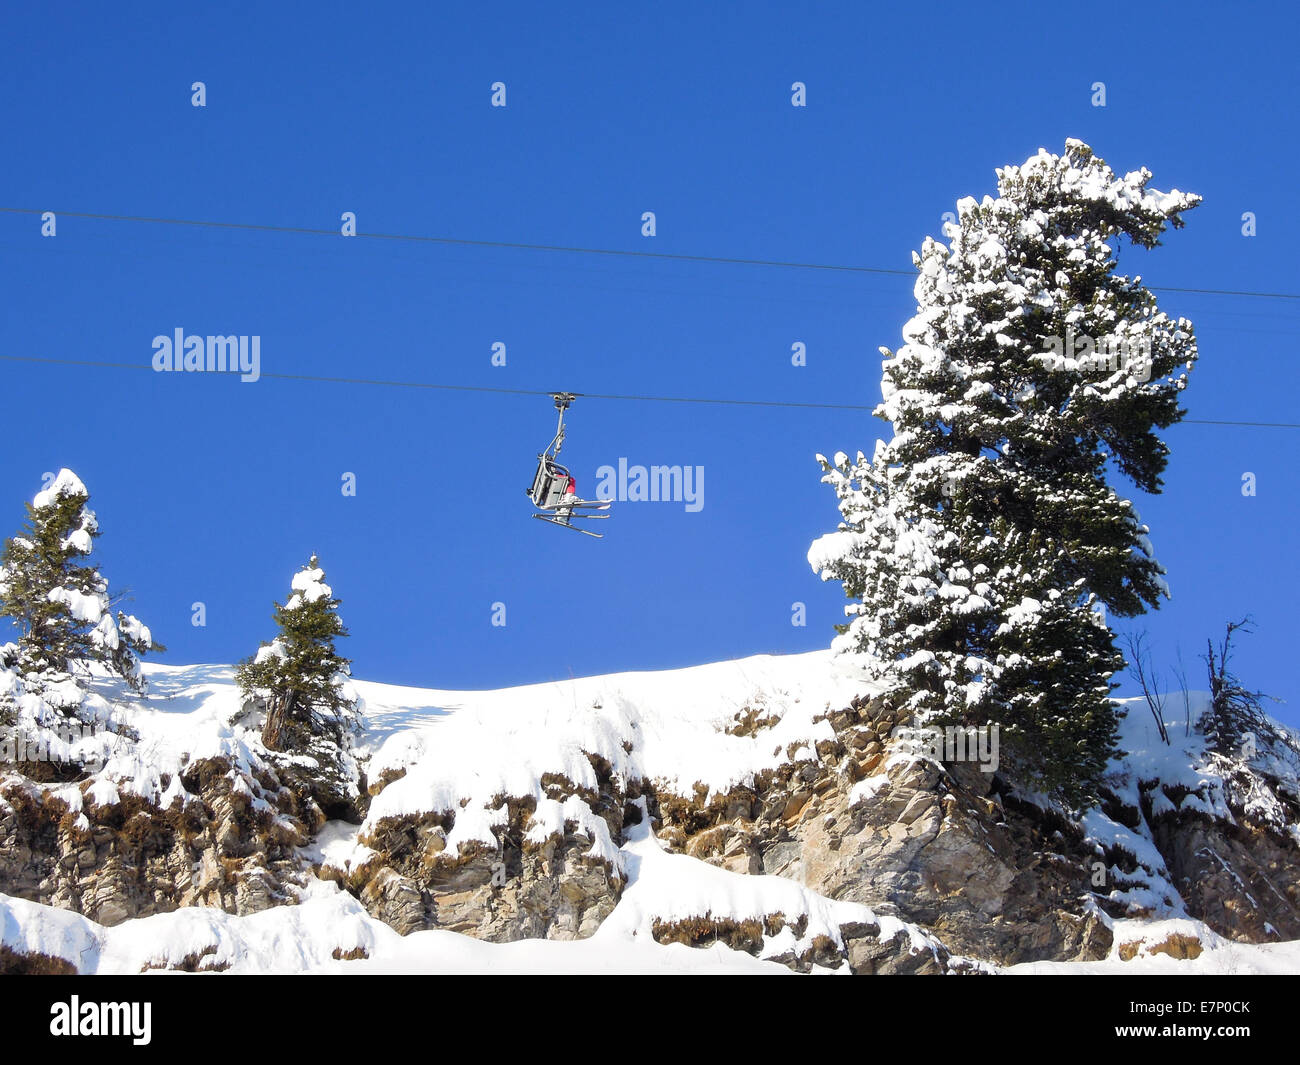 Switzerland, alpine, alps, chair lift, clear, cold, country, day, destinations, Engelberg, equipment, Europe, hill, holiday, ice Stock Photo